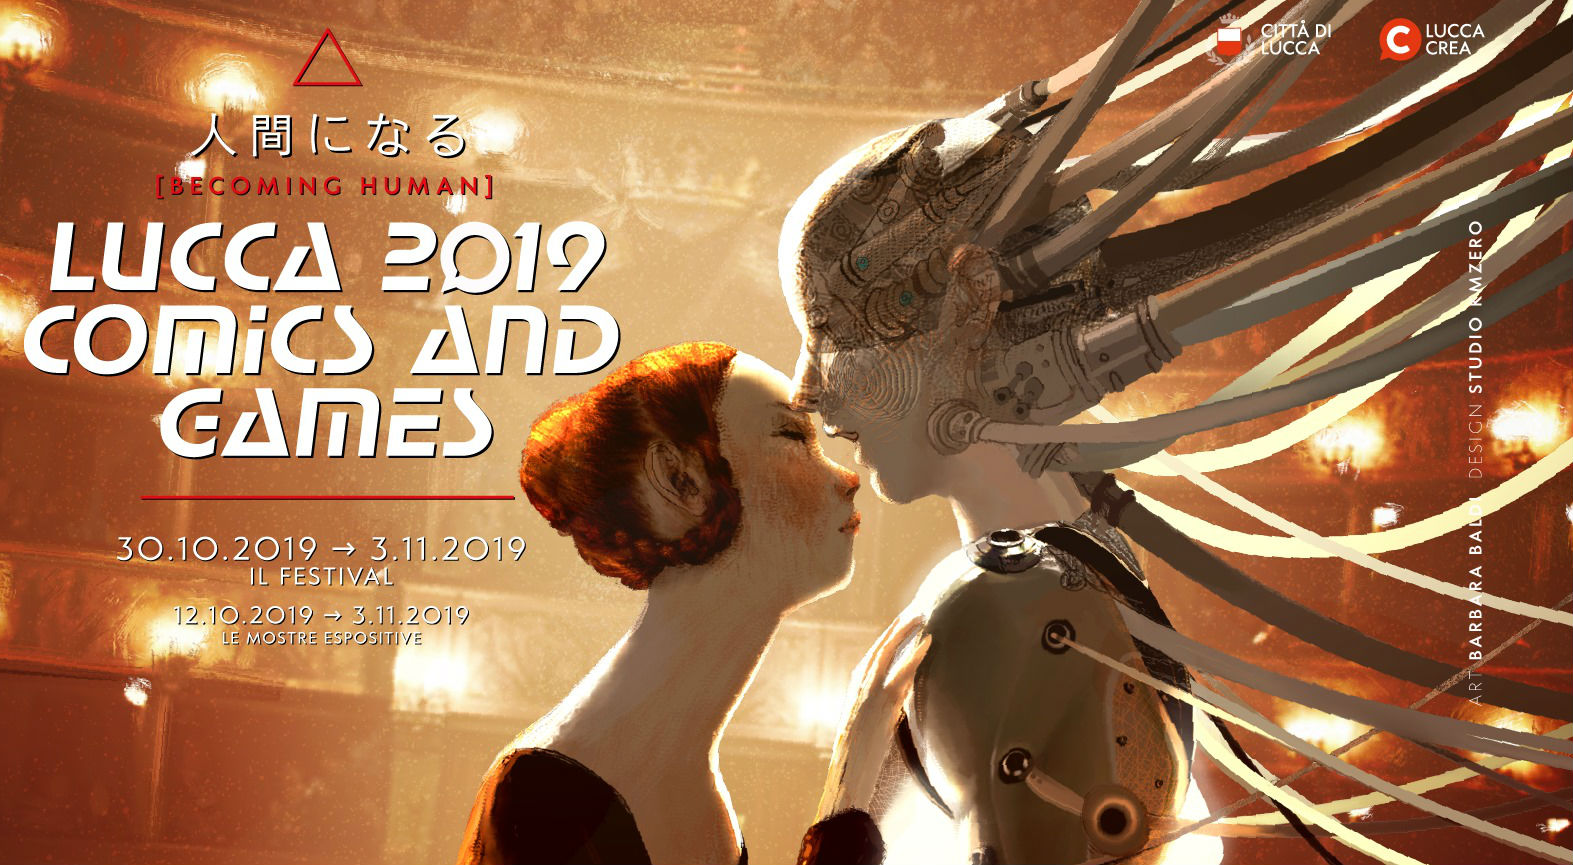 LUCCA COMICS AND GAMES 2019